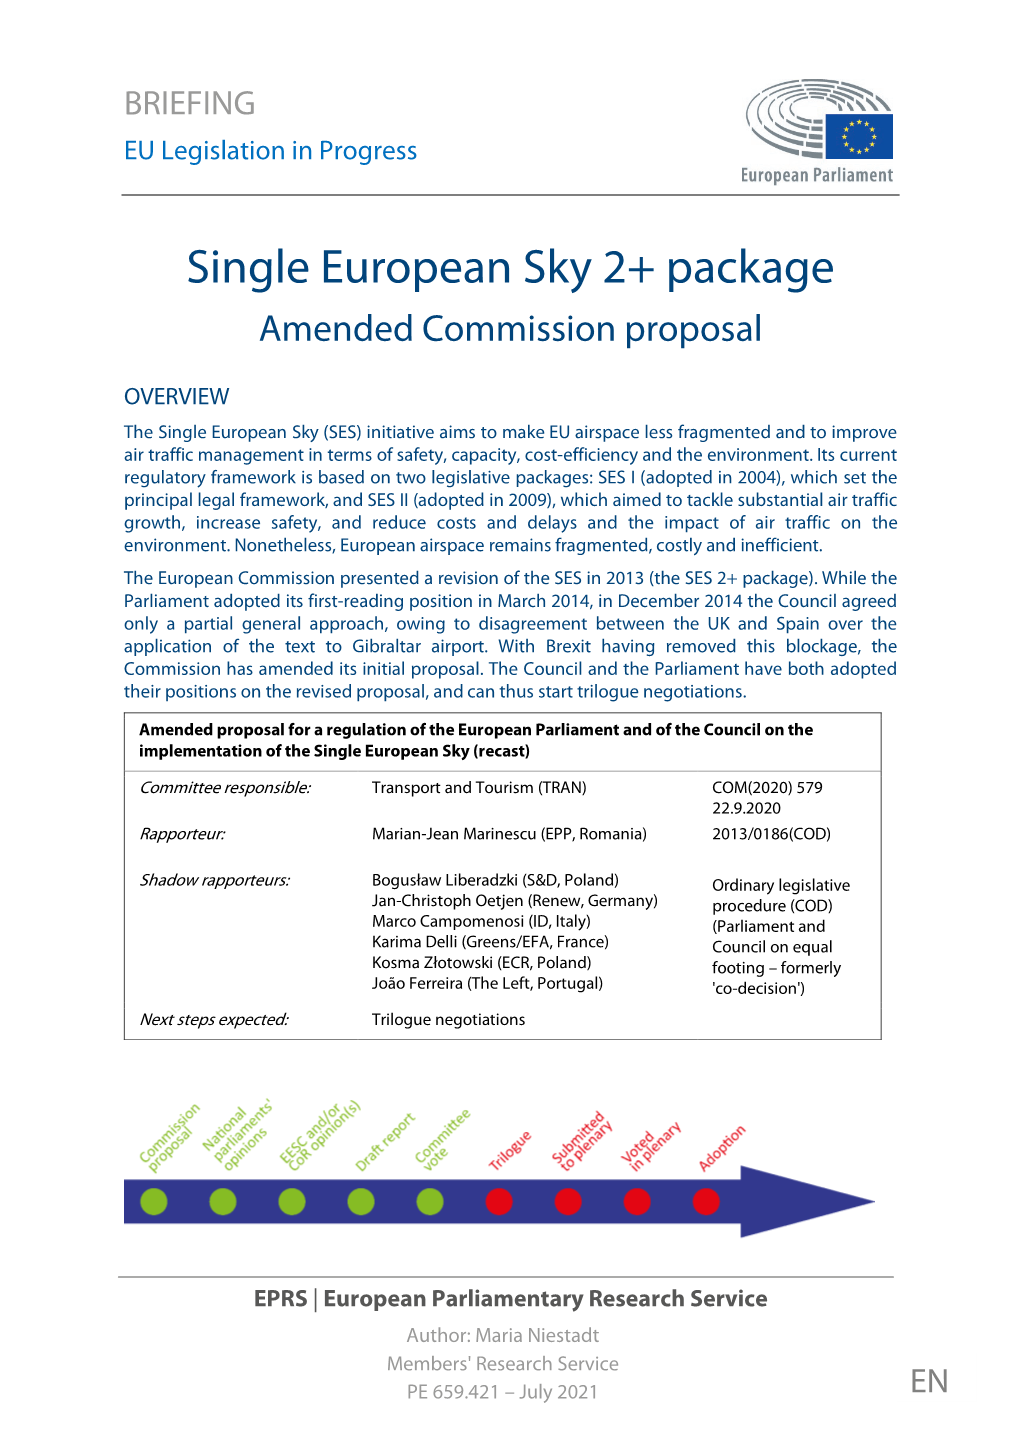 Single European Sky 2+ Package Amended Commission Proposal